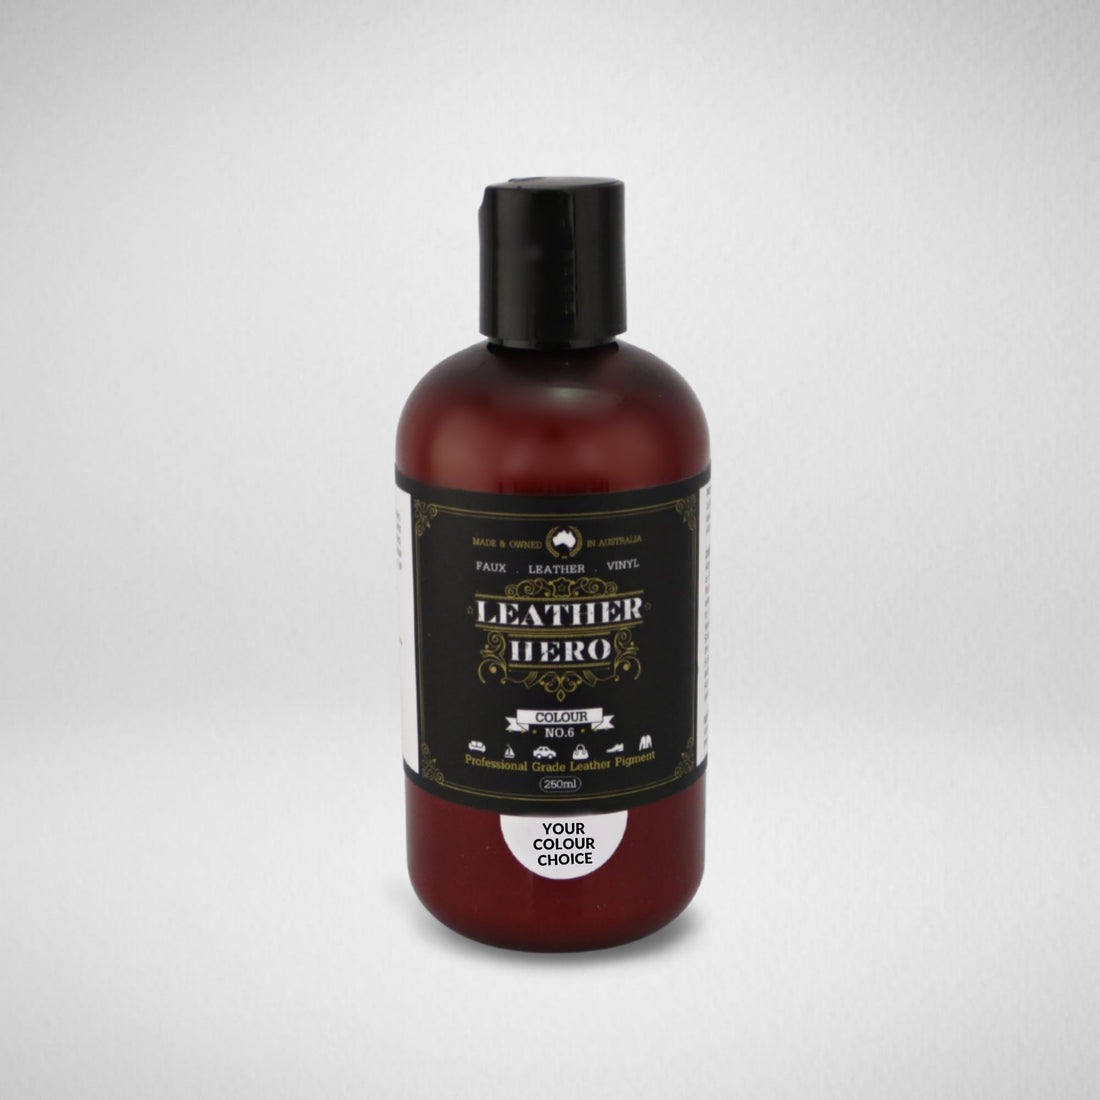 Leather Paint - Sky Leather Repair & Recolouring Leather Hero Australia